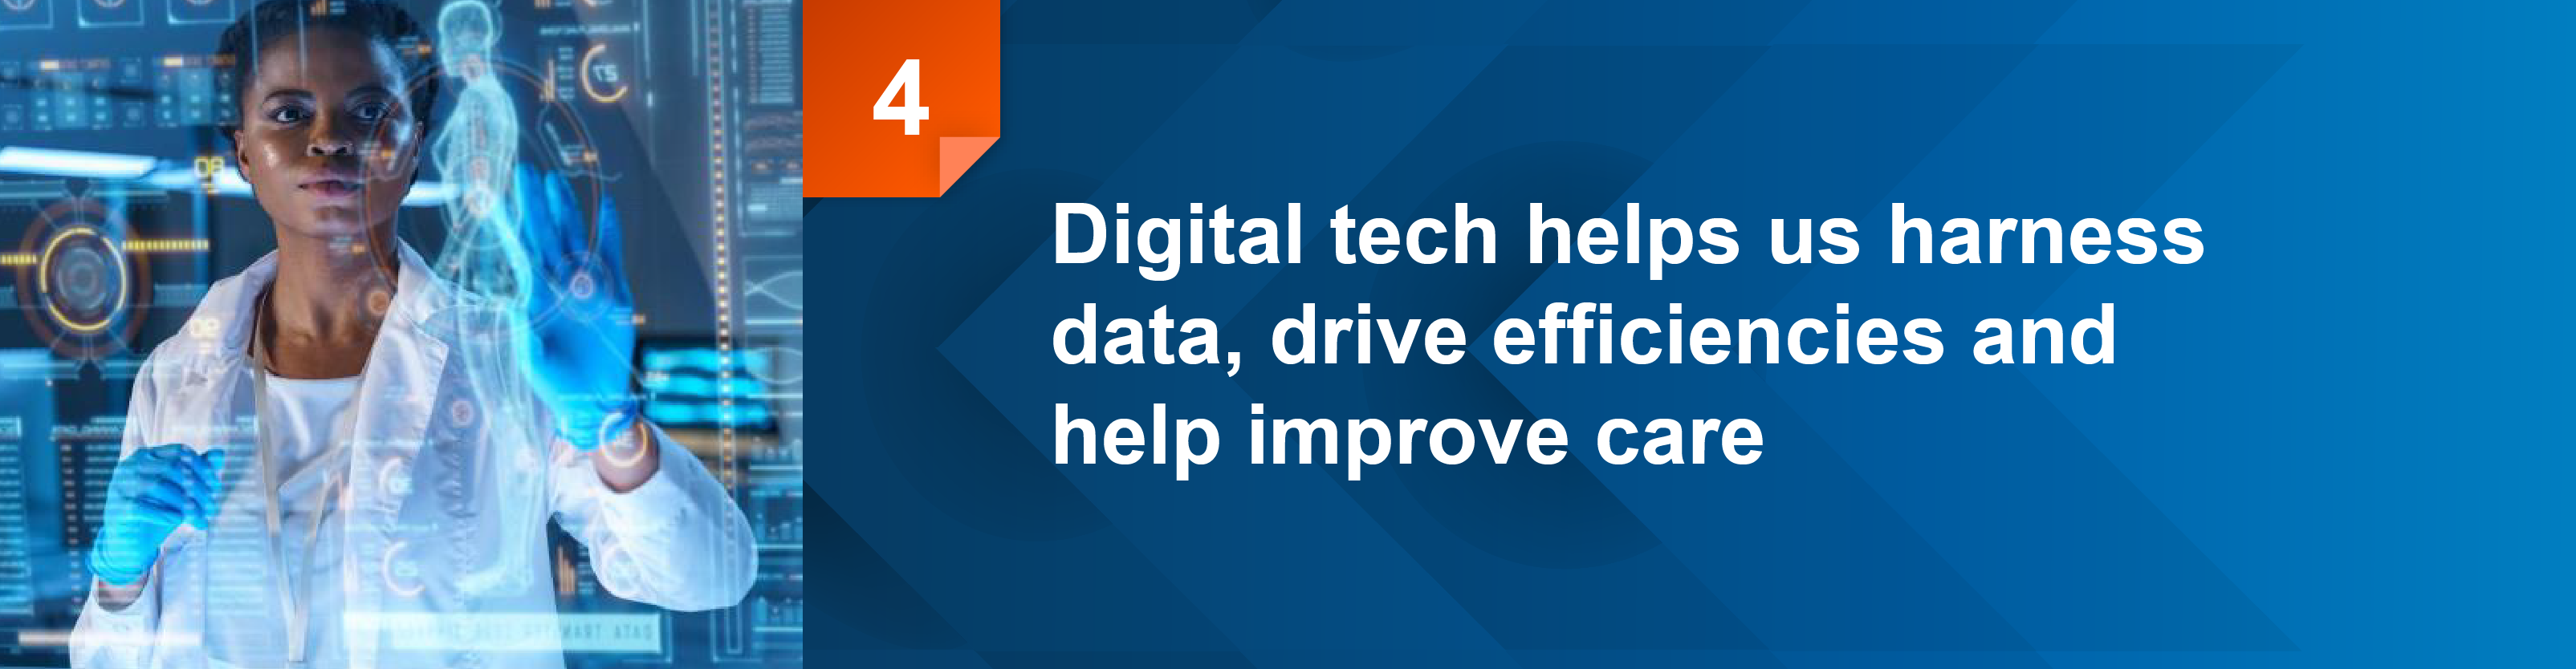 Digital tech helps us harness data drive efficiencies and help improve care